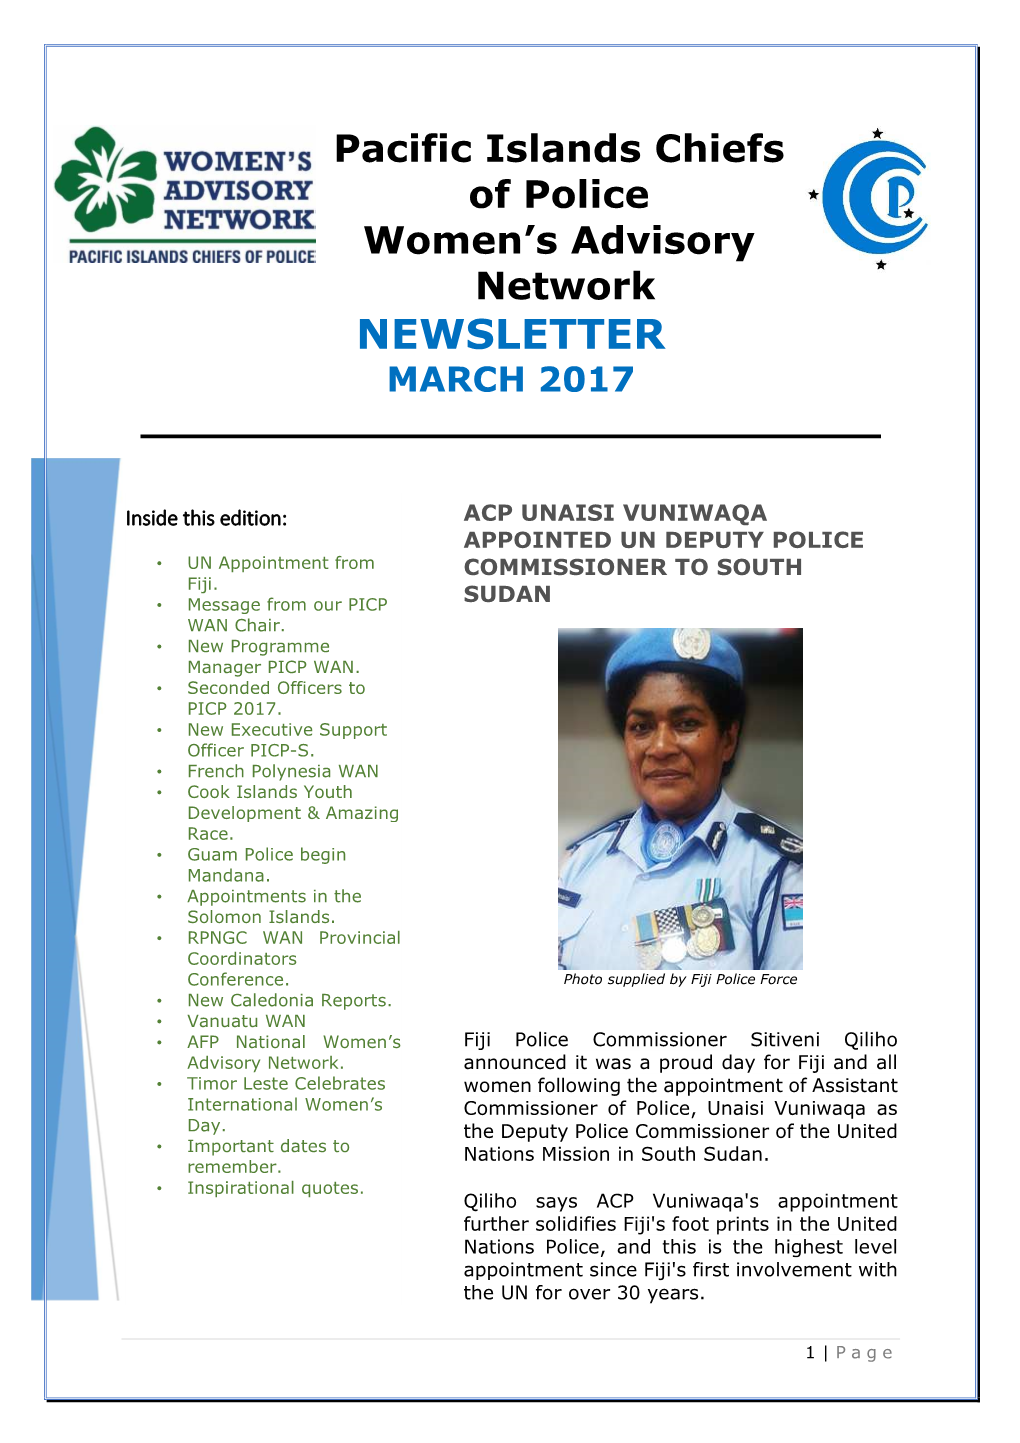 Pacific Islands Chiefs of Police March Edition